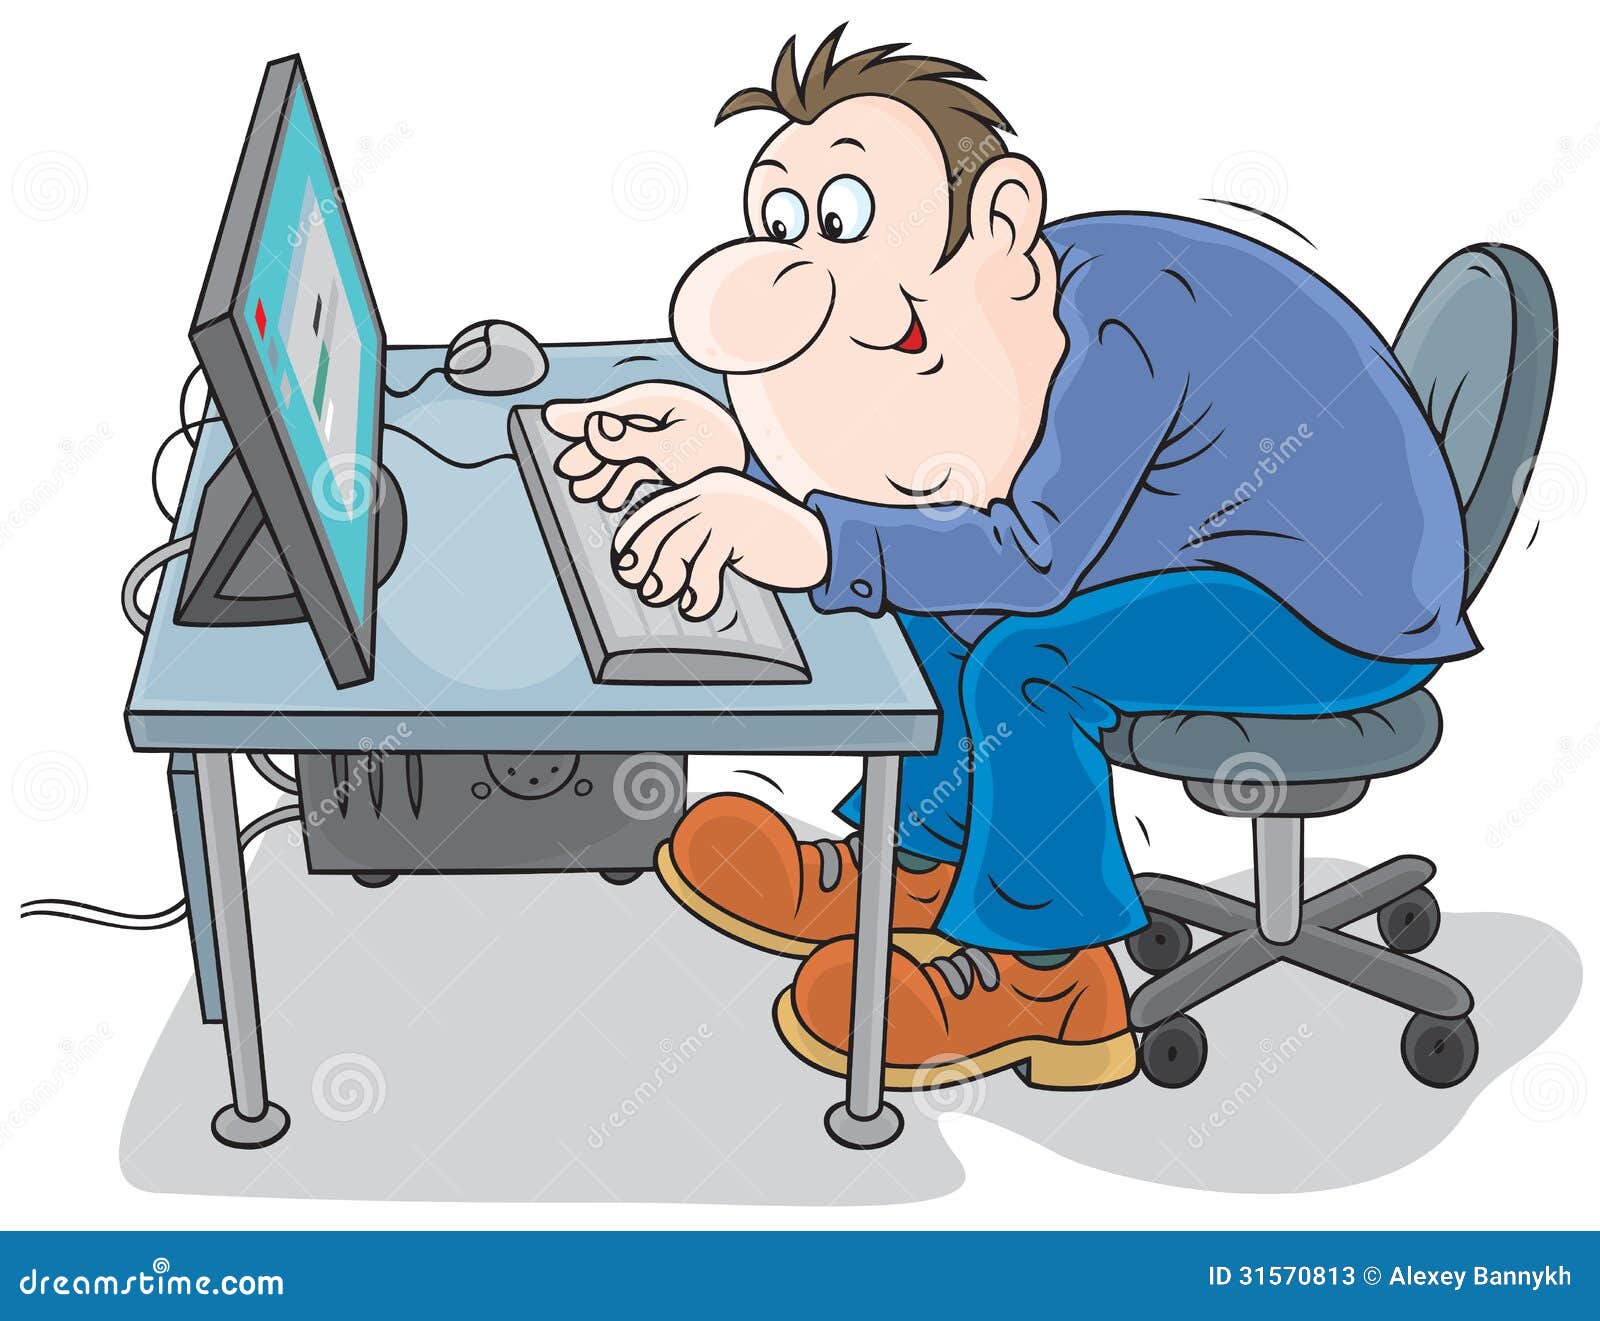 computer worker clipart - photo #4